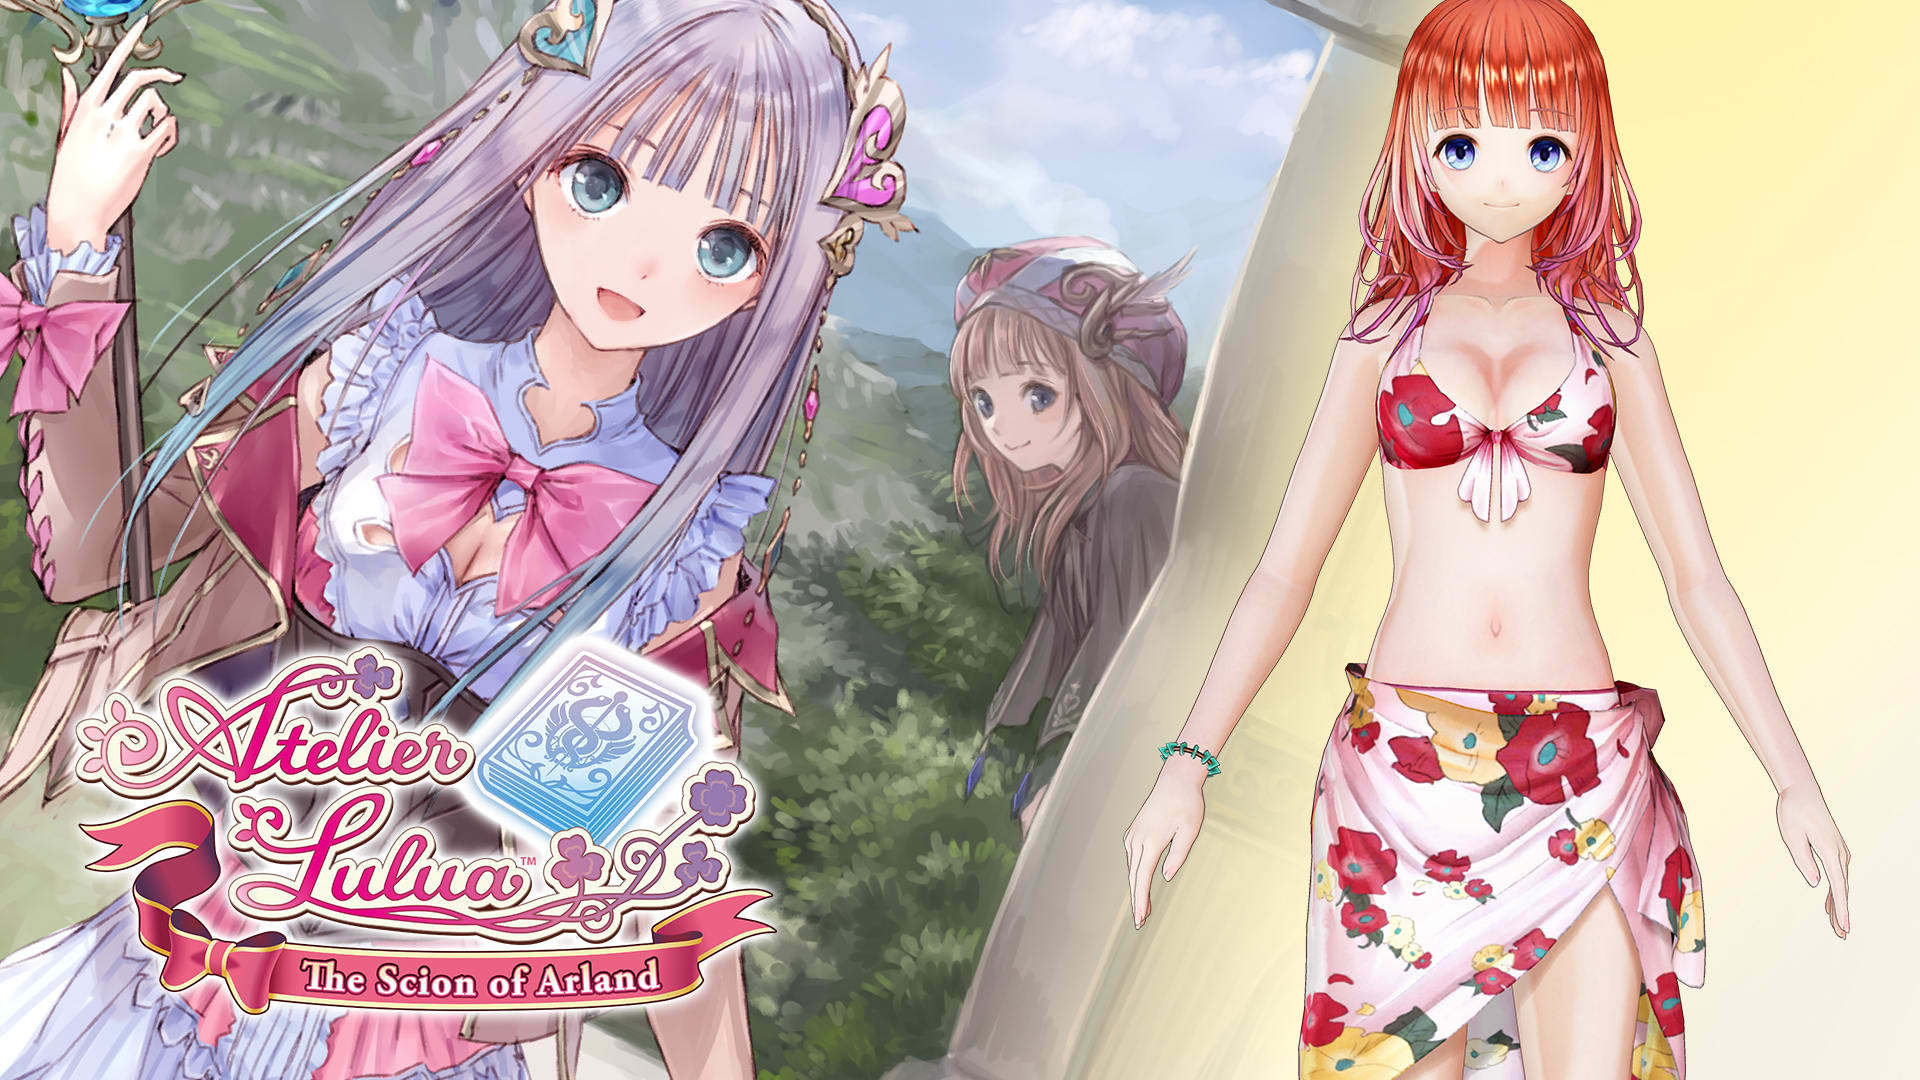 Rorona's Swimsuit "Floral Pareo"